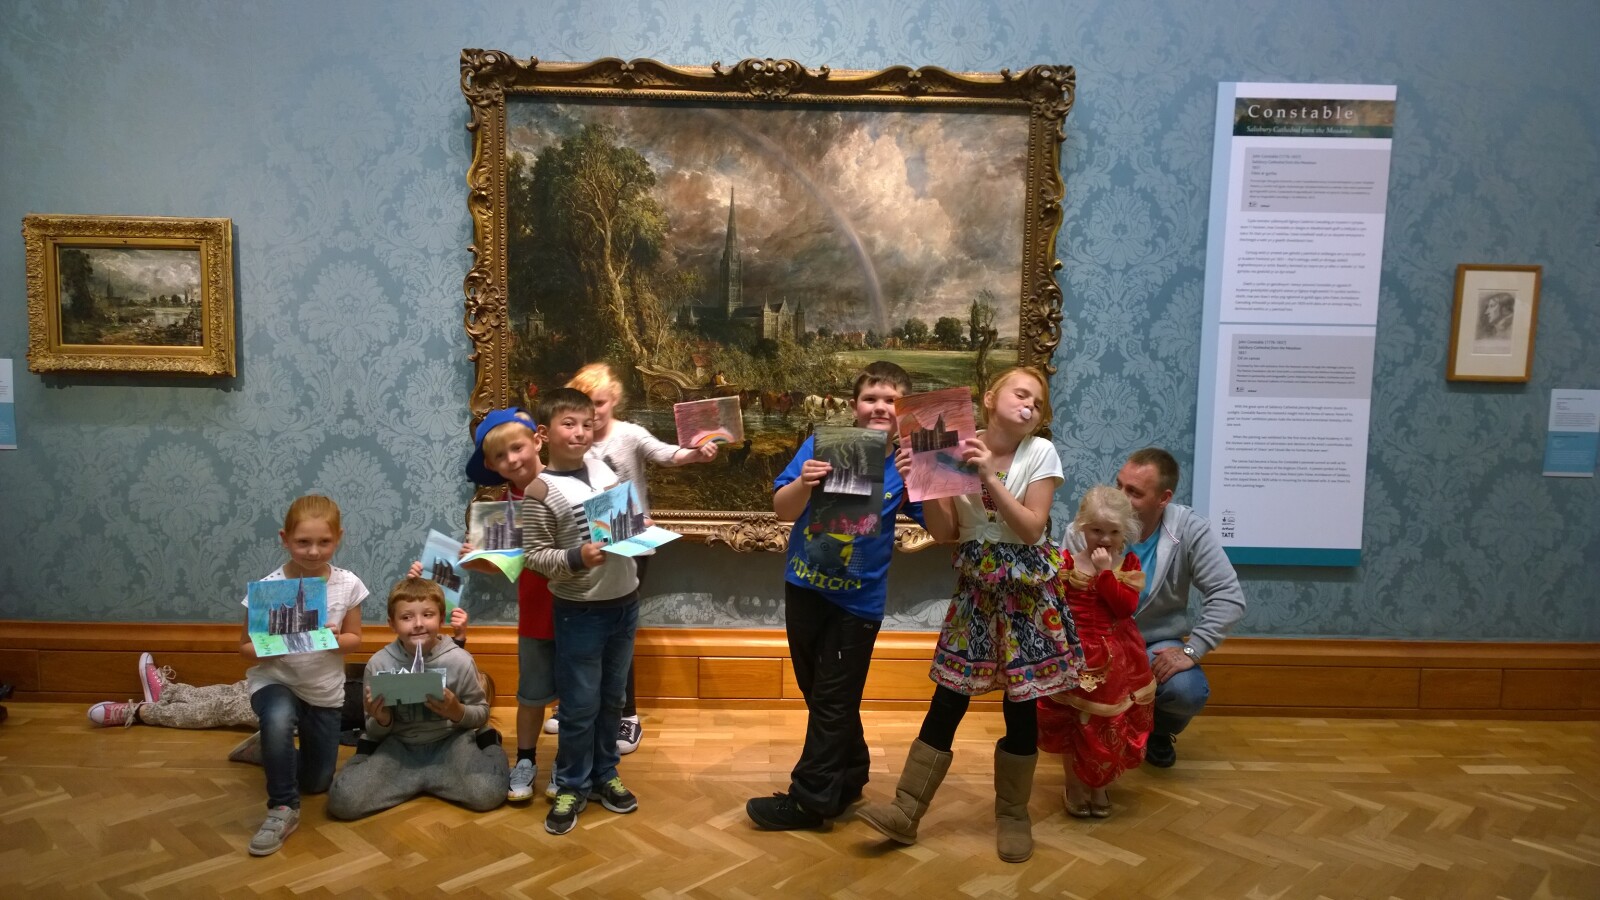 A group of young children standing in front of a painting, holding up their artworks